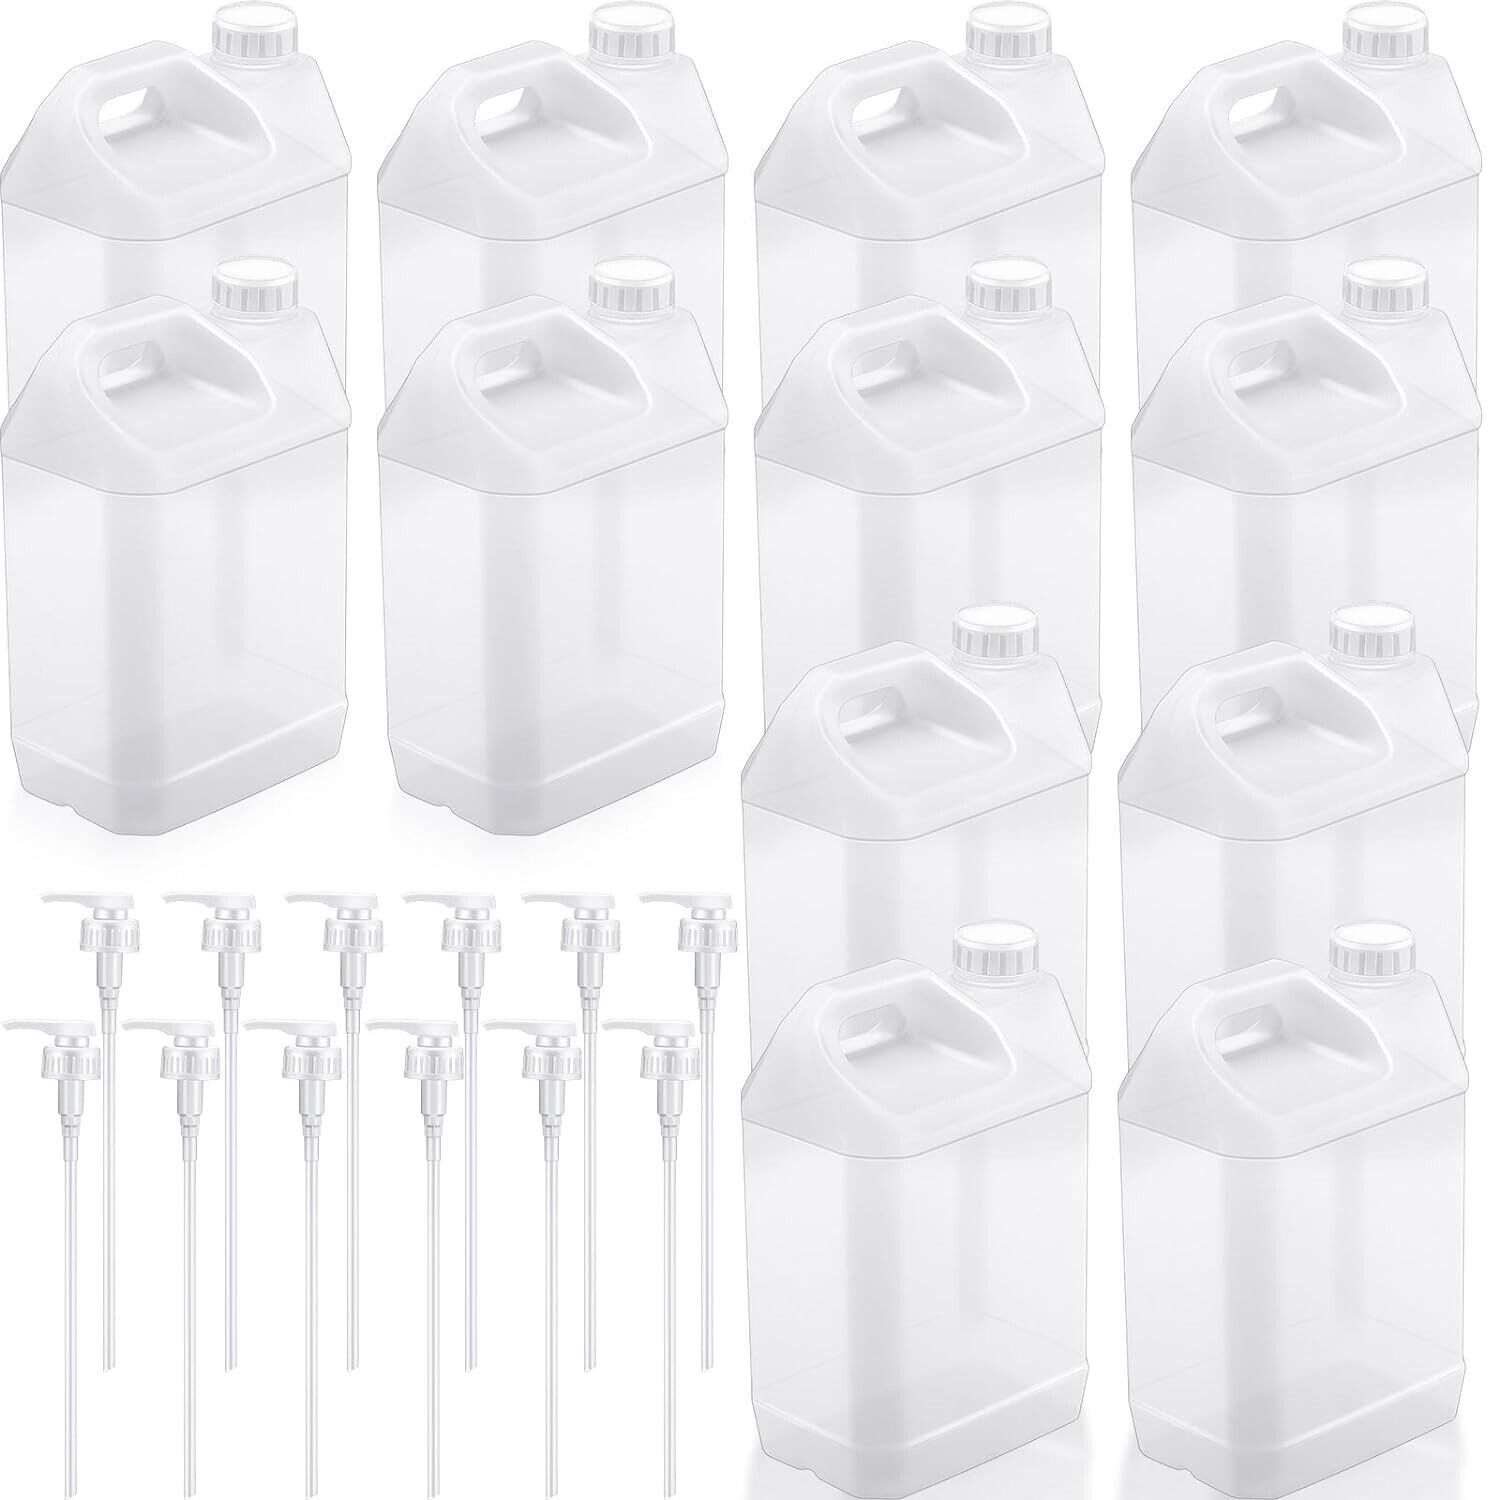 NEW 1 Gallon HDPE Plastic Jugs with Child Resistant Lids and Pumps (12-Pack)